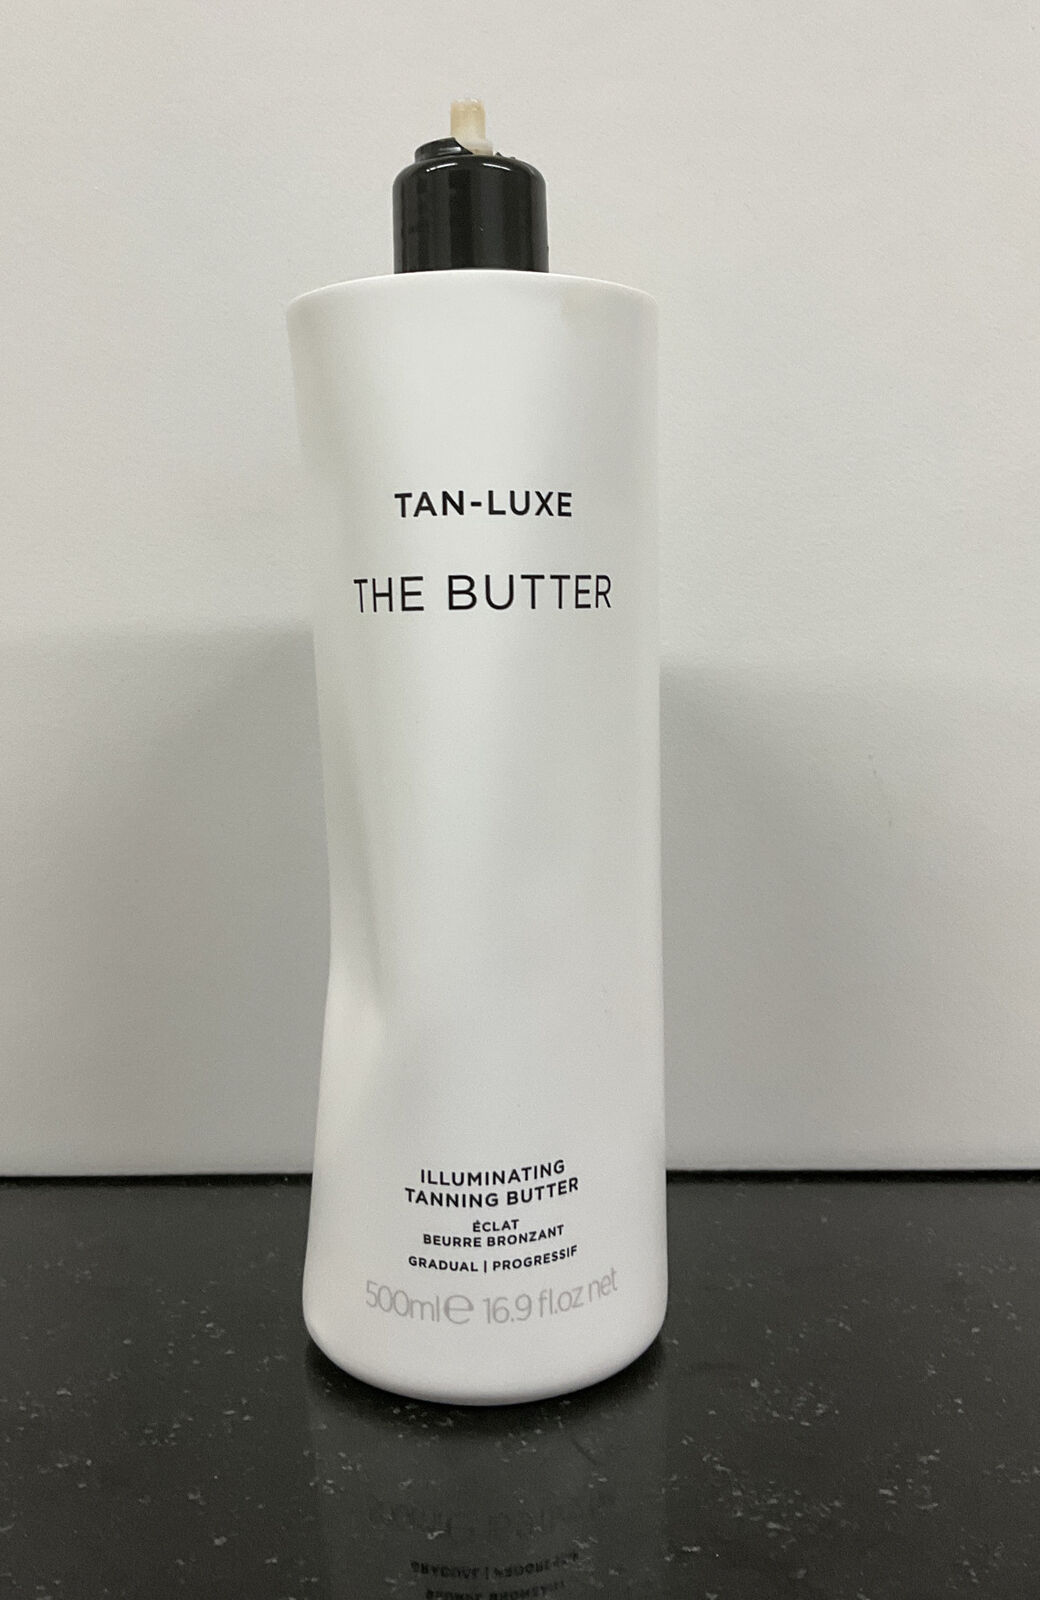 Tan-Luxe THE BUTTER Illuminating Tanning Body Lotion Self Tanner 16.9 Oz ~ 